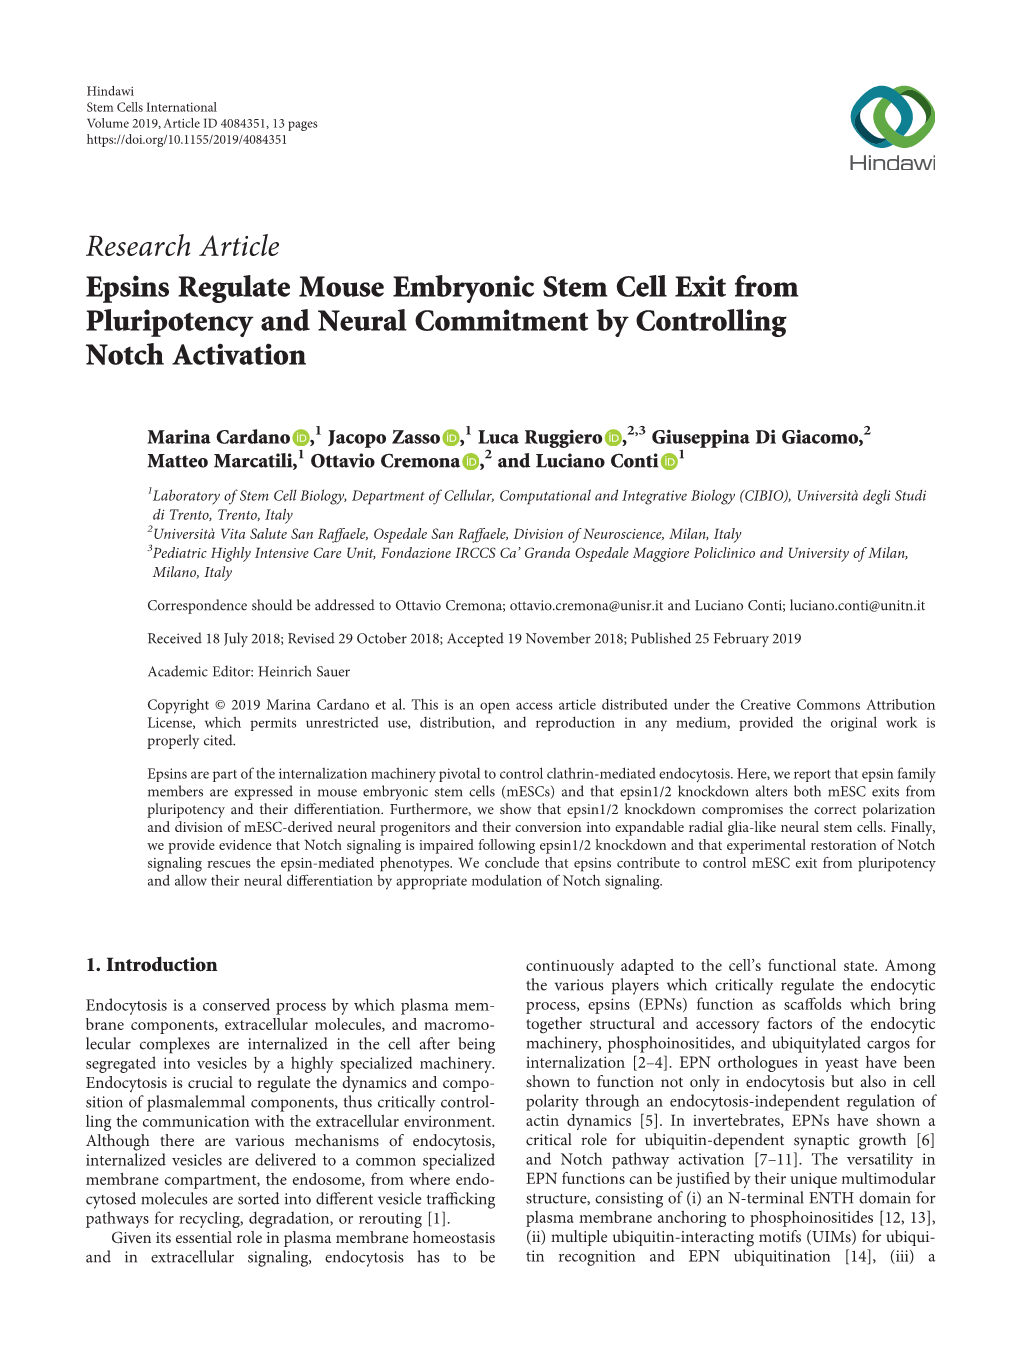 Research Article Epsins Regulate Mouse Embryonic Stem Cell Exit from Pluripotency and Neural Commitment by Controlling Notch Activation